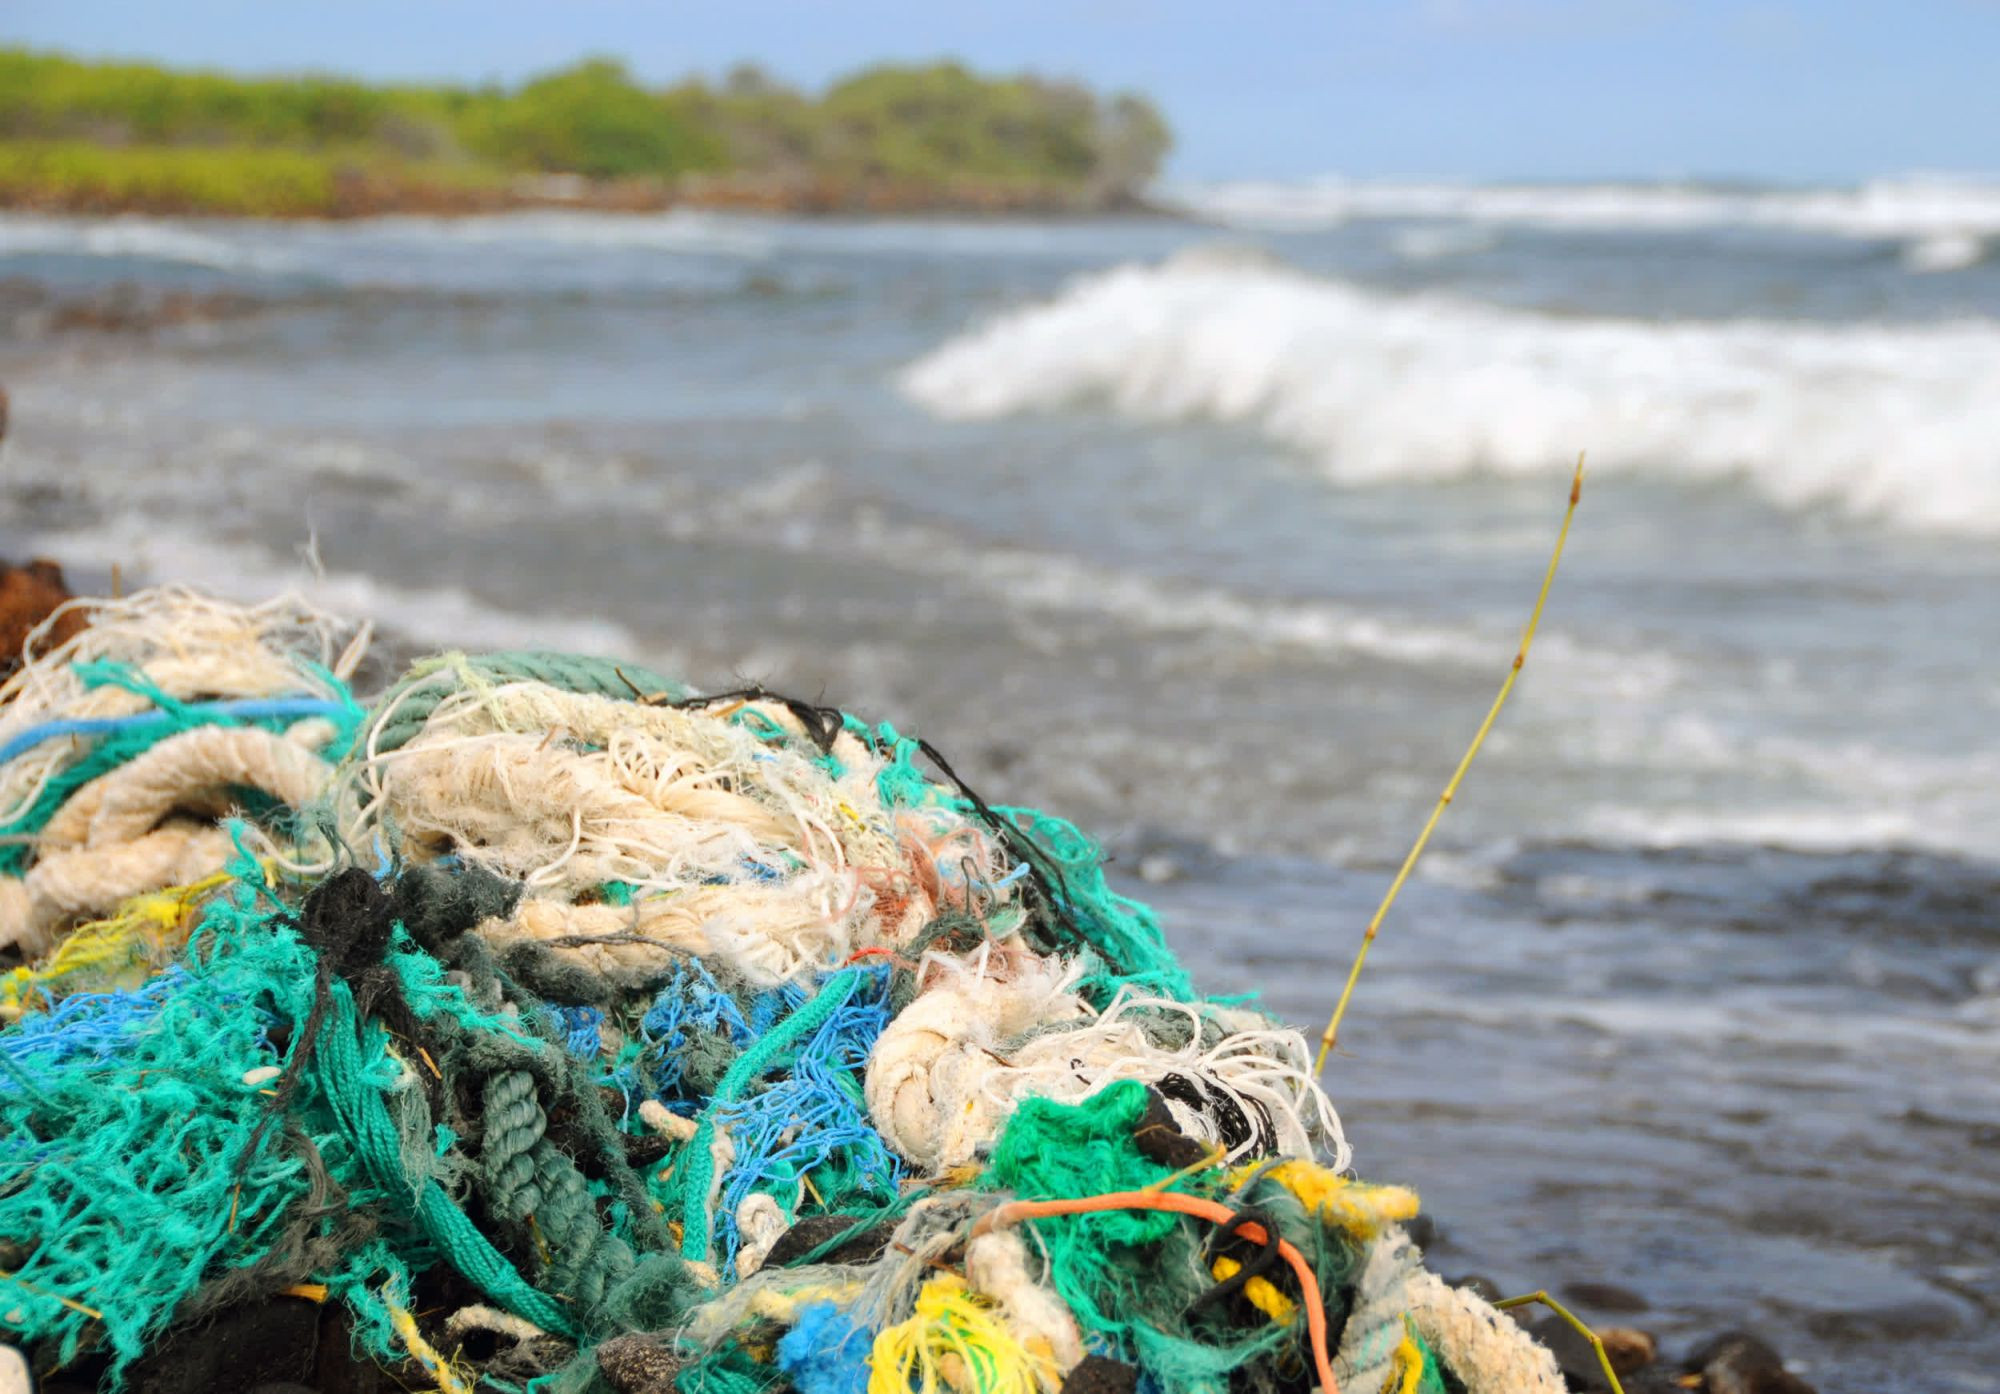 Removing ghost gear from a beach - Sea Change - World Animal Protection